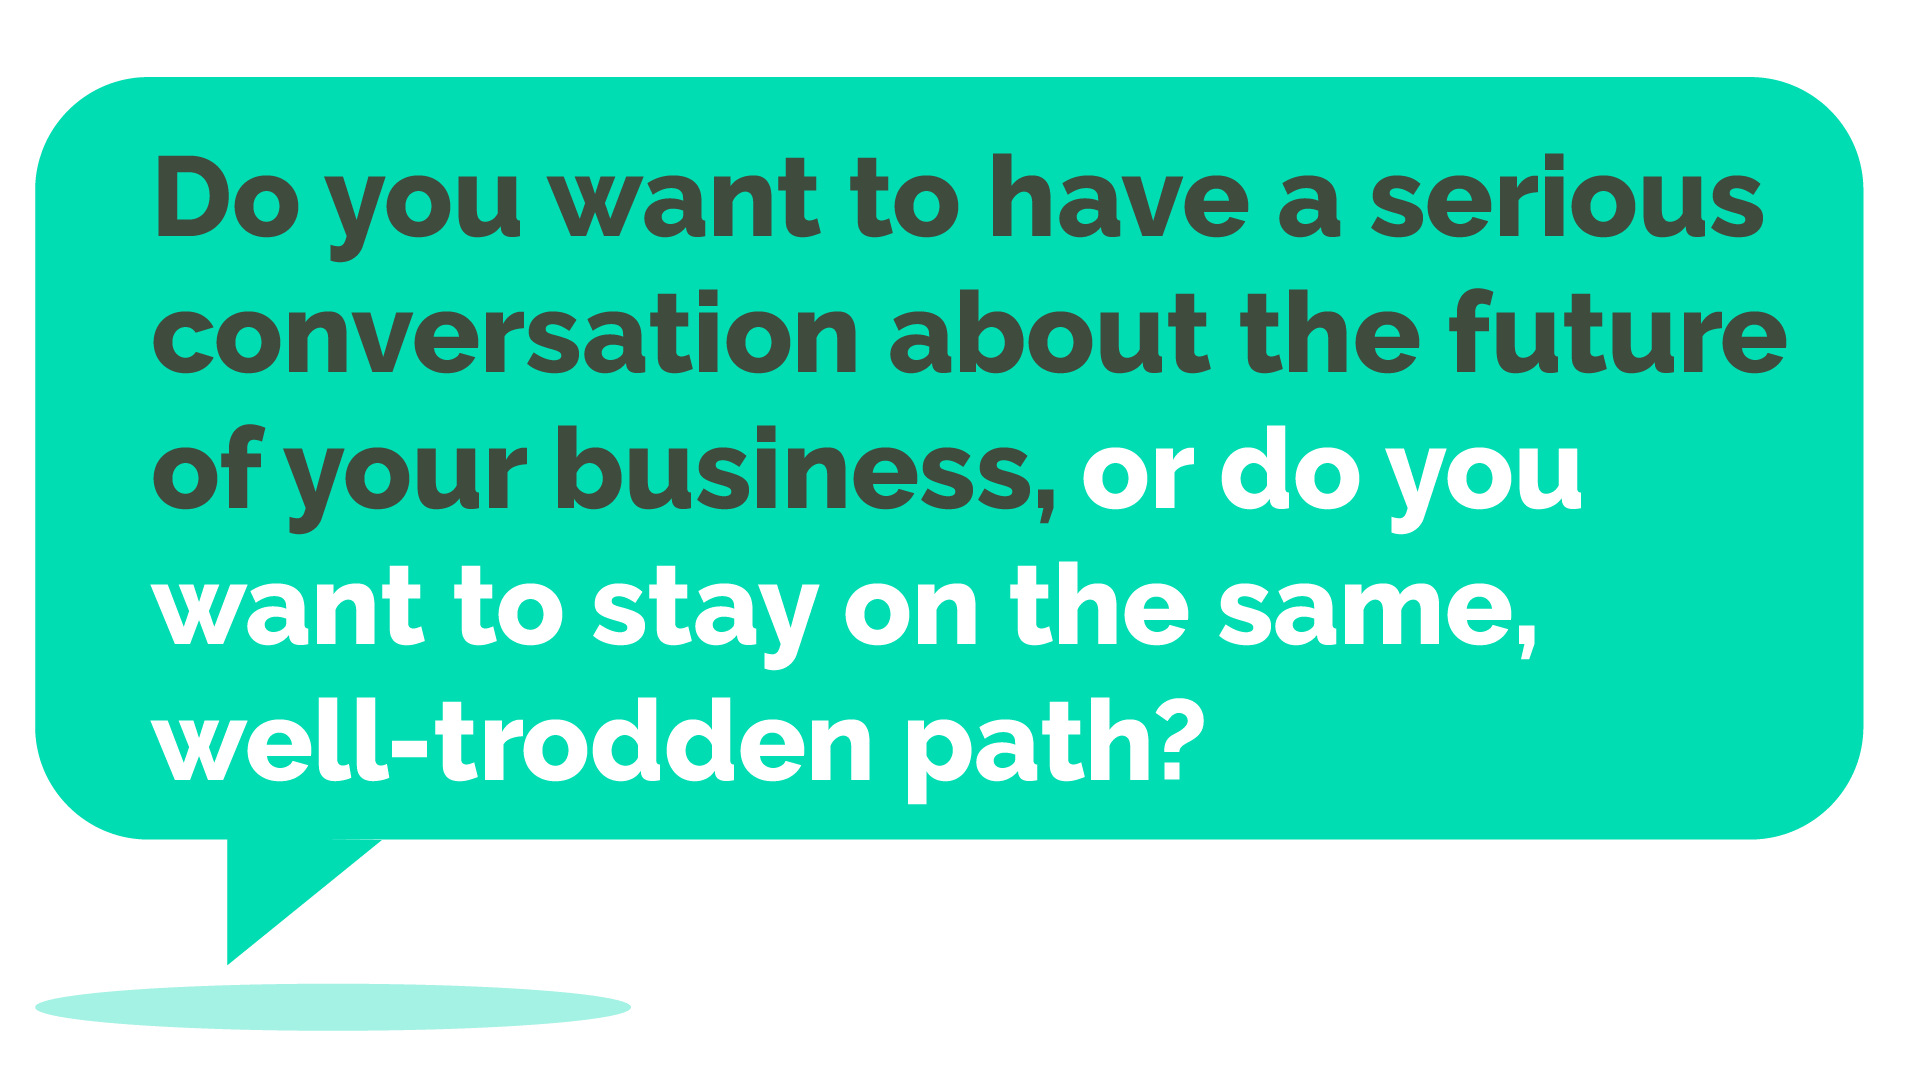 Do you want to have a serious conversation about the future of your business, or do you want to stay on the same, well-trodden path?